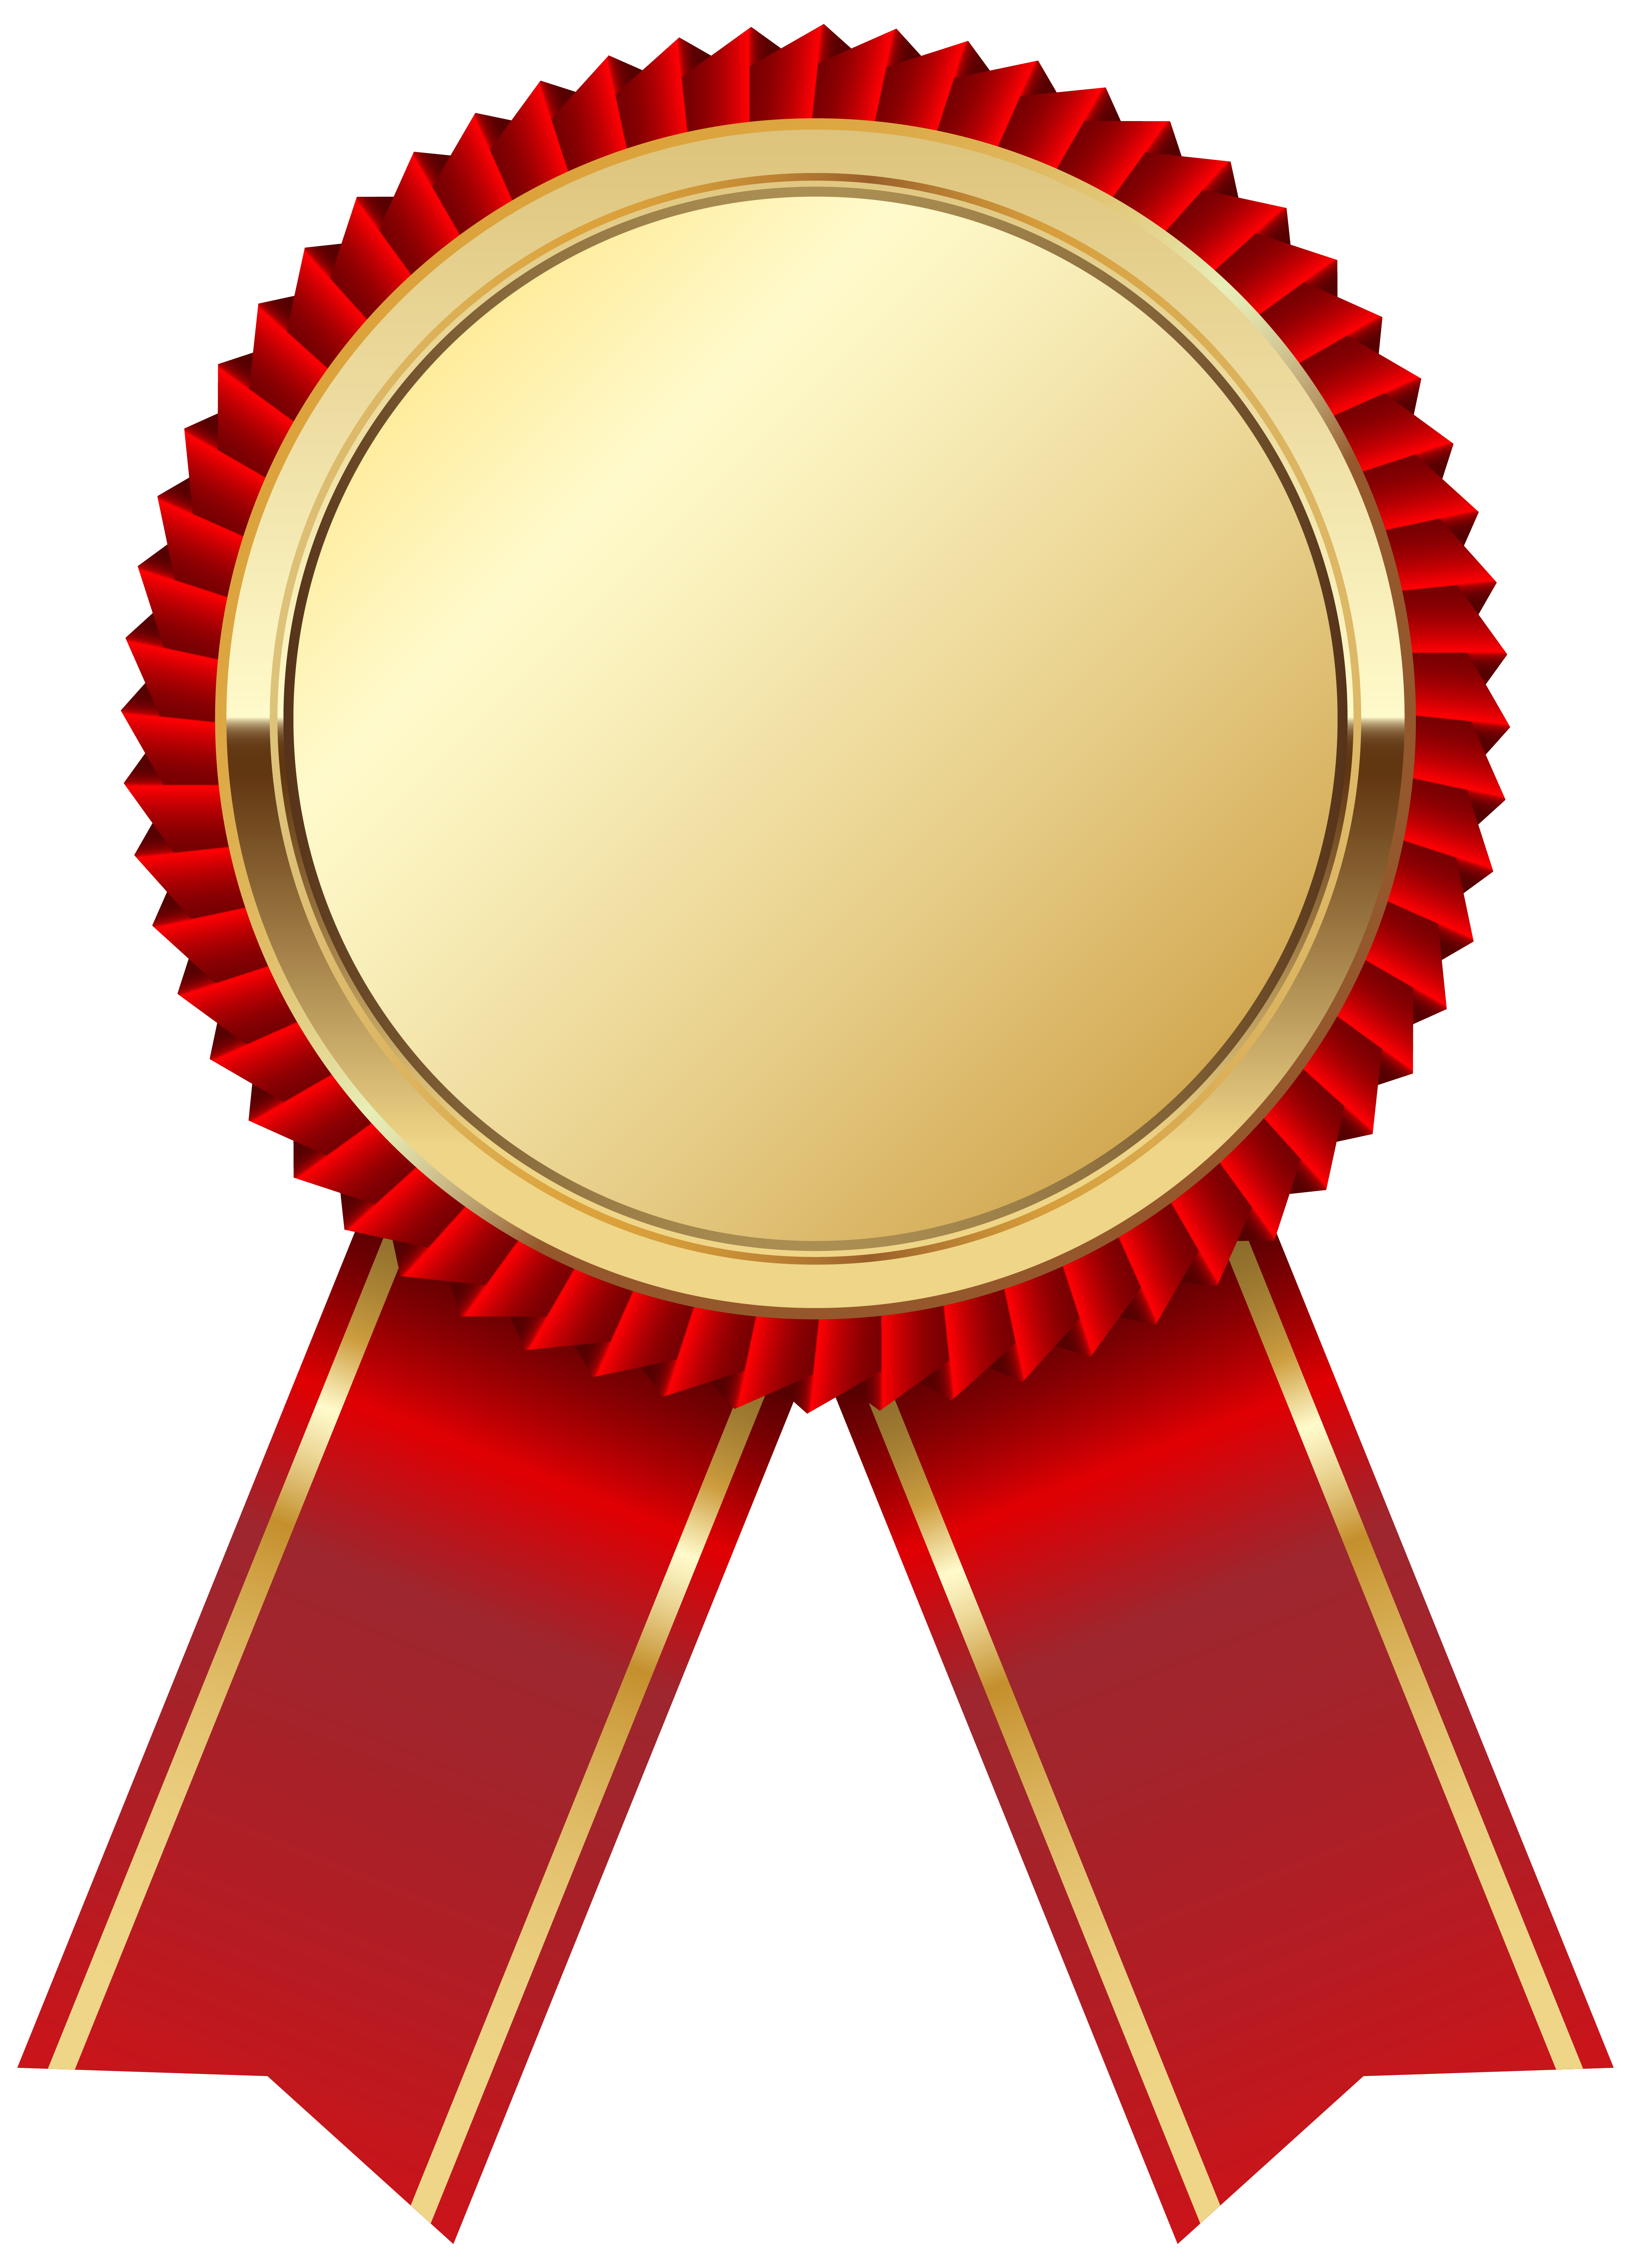 clipart medals - photo #25